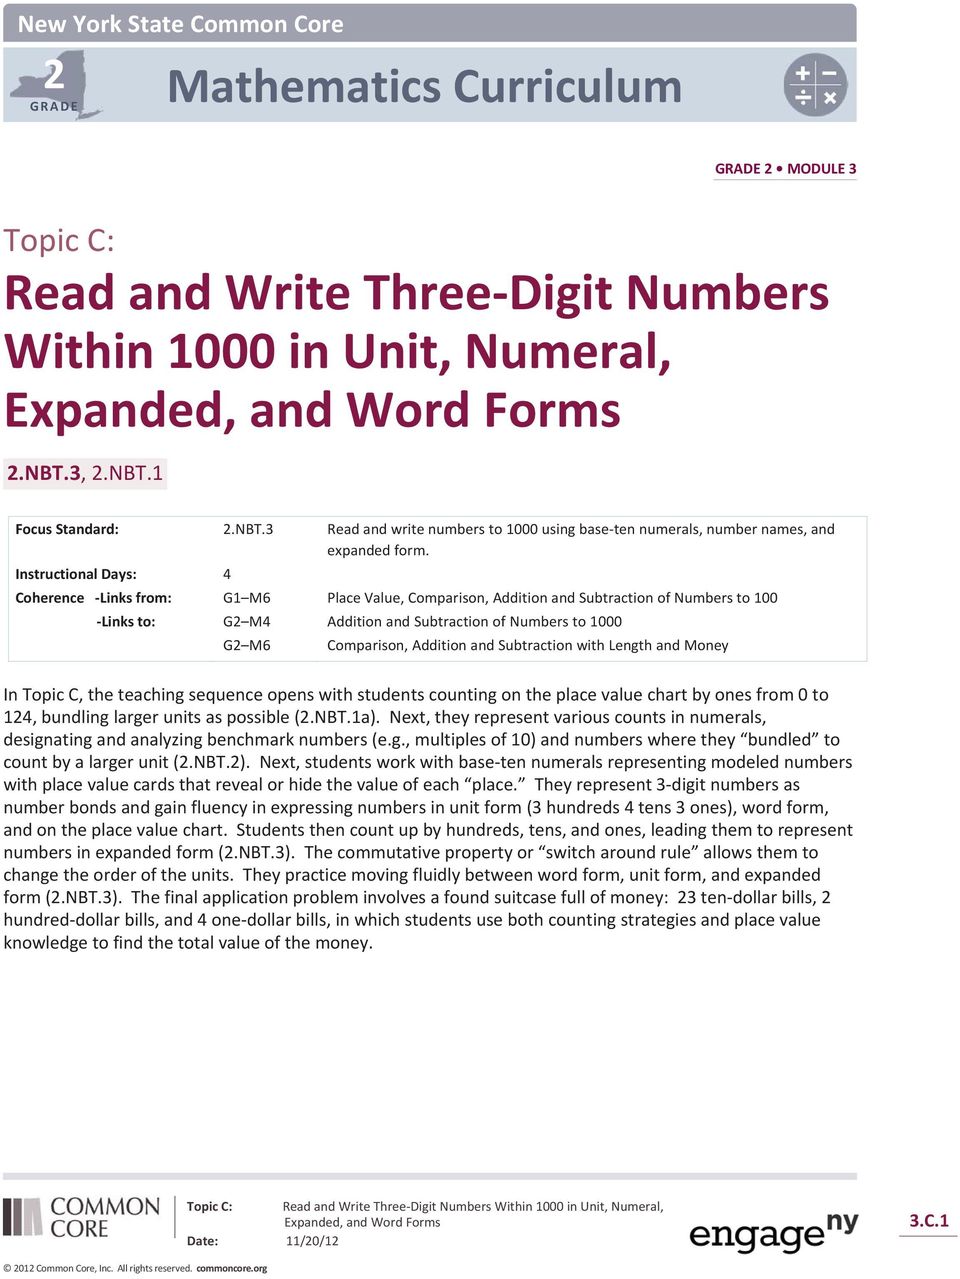 Instructional Days: 4 Coherence Links from: G1 M6 Place Value, Comparison, Addition and Subtraction of Numbers to 100 Links to: G2 M4 Addition and Subtraction of Numbers to 1000 G2 M6 Comparison,